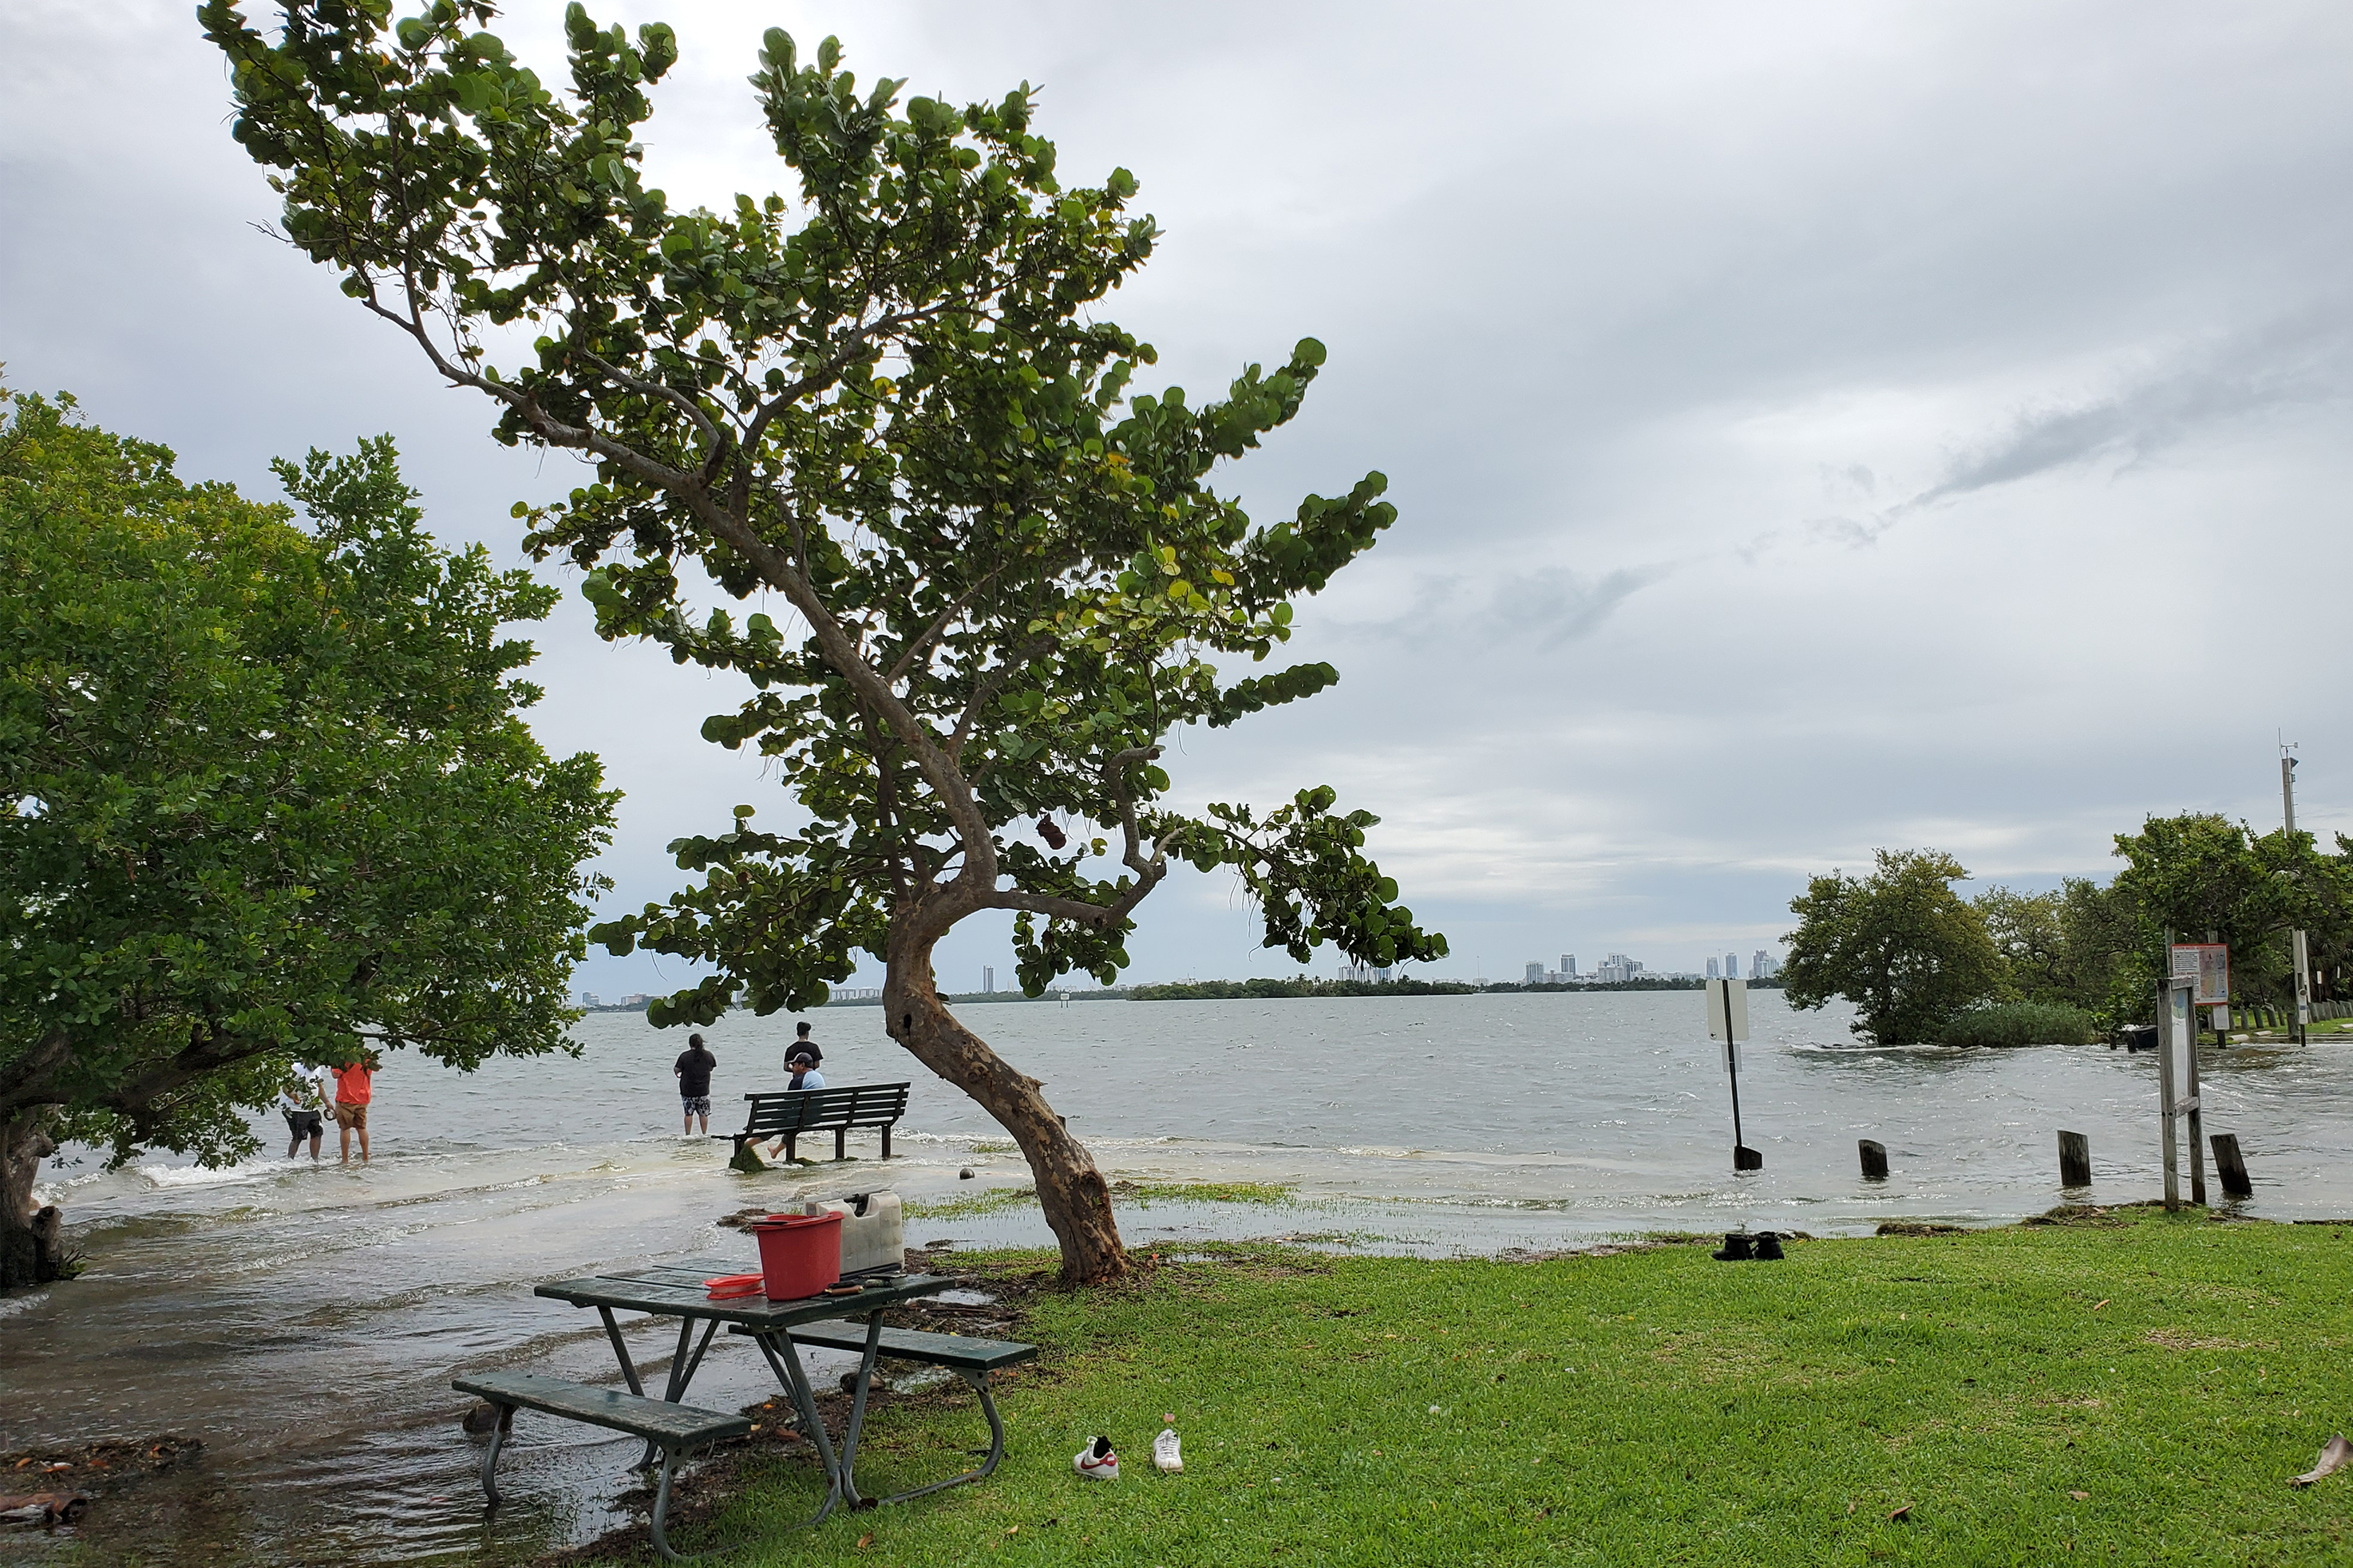 Morningside Park in Miami Florida during a King tide spills water over the shoreline, covering benches and picnic tables. 